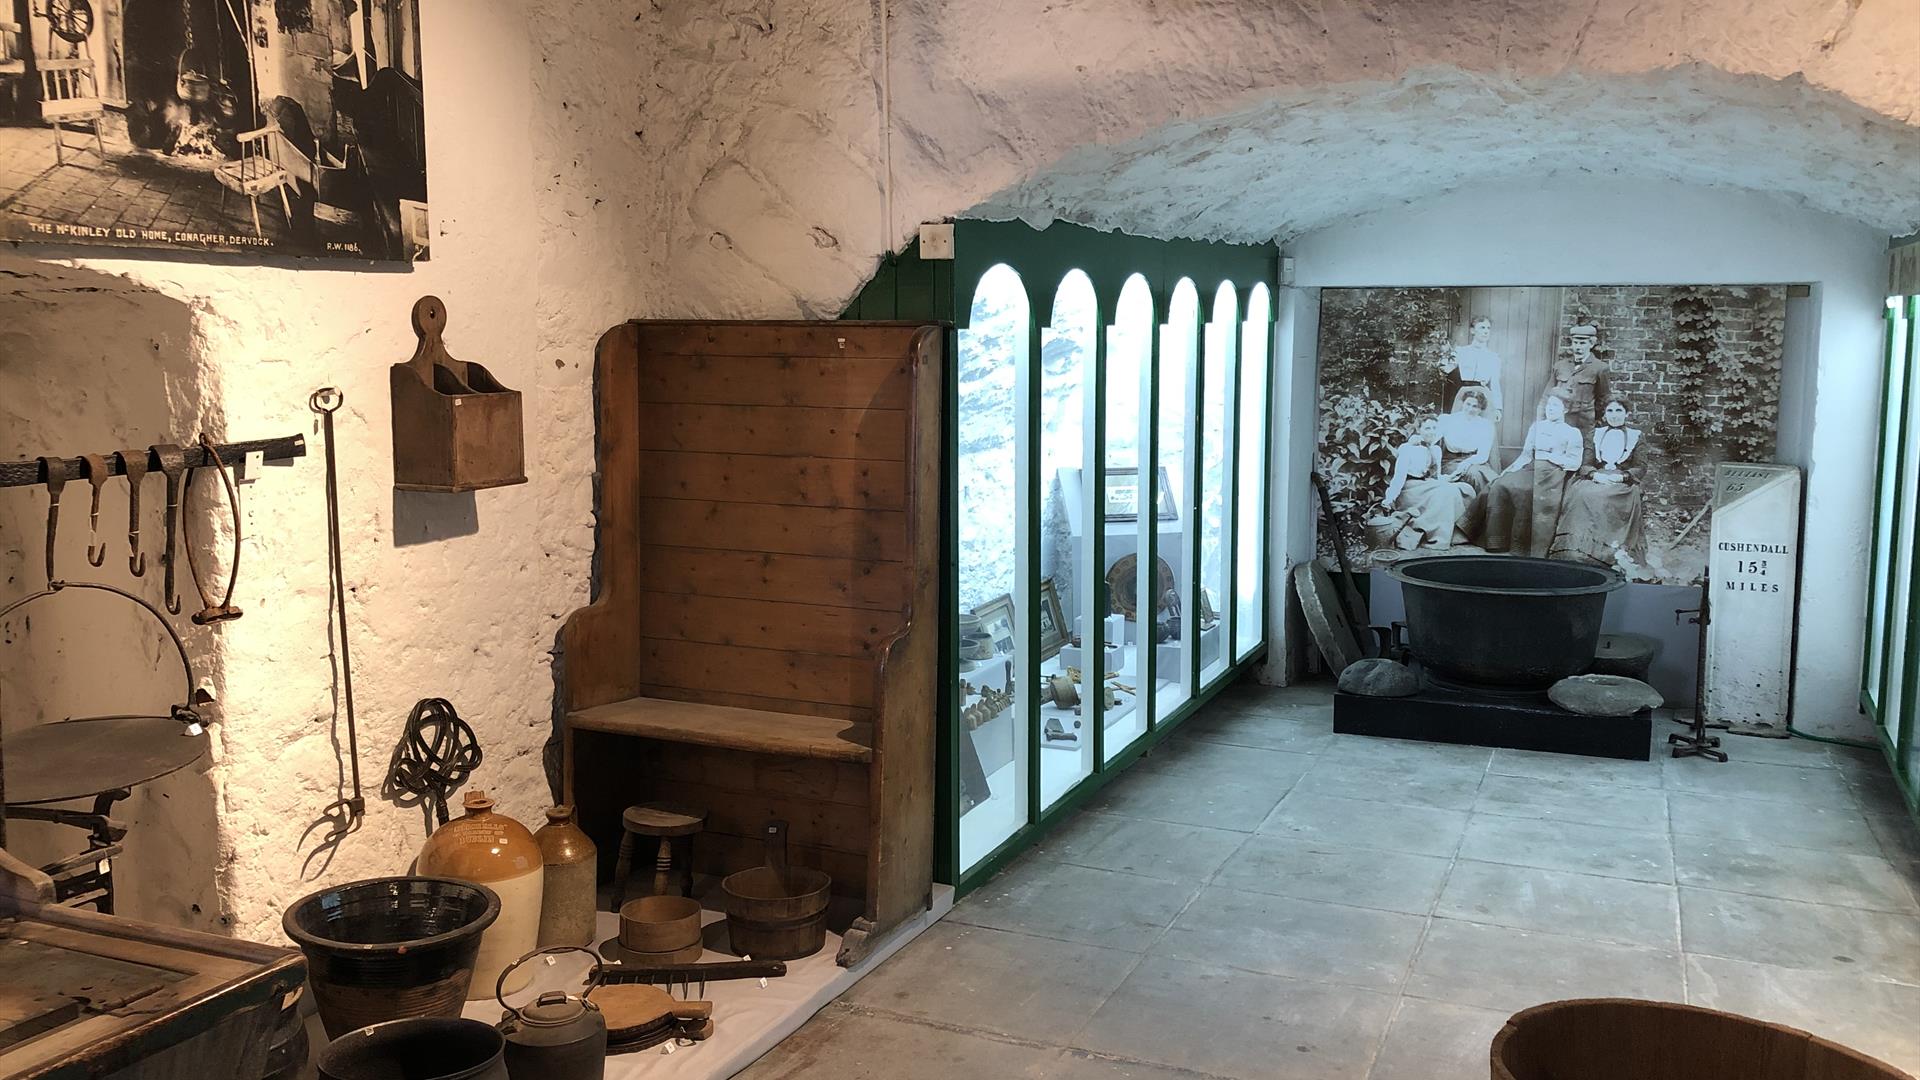 inside view of exhibits in museum looking down a passageway with some items attached to wall, some on floor, and a glass fronted display case on left.